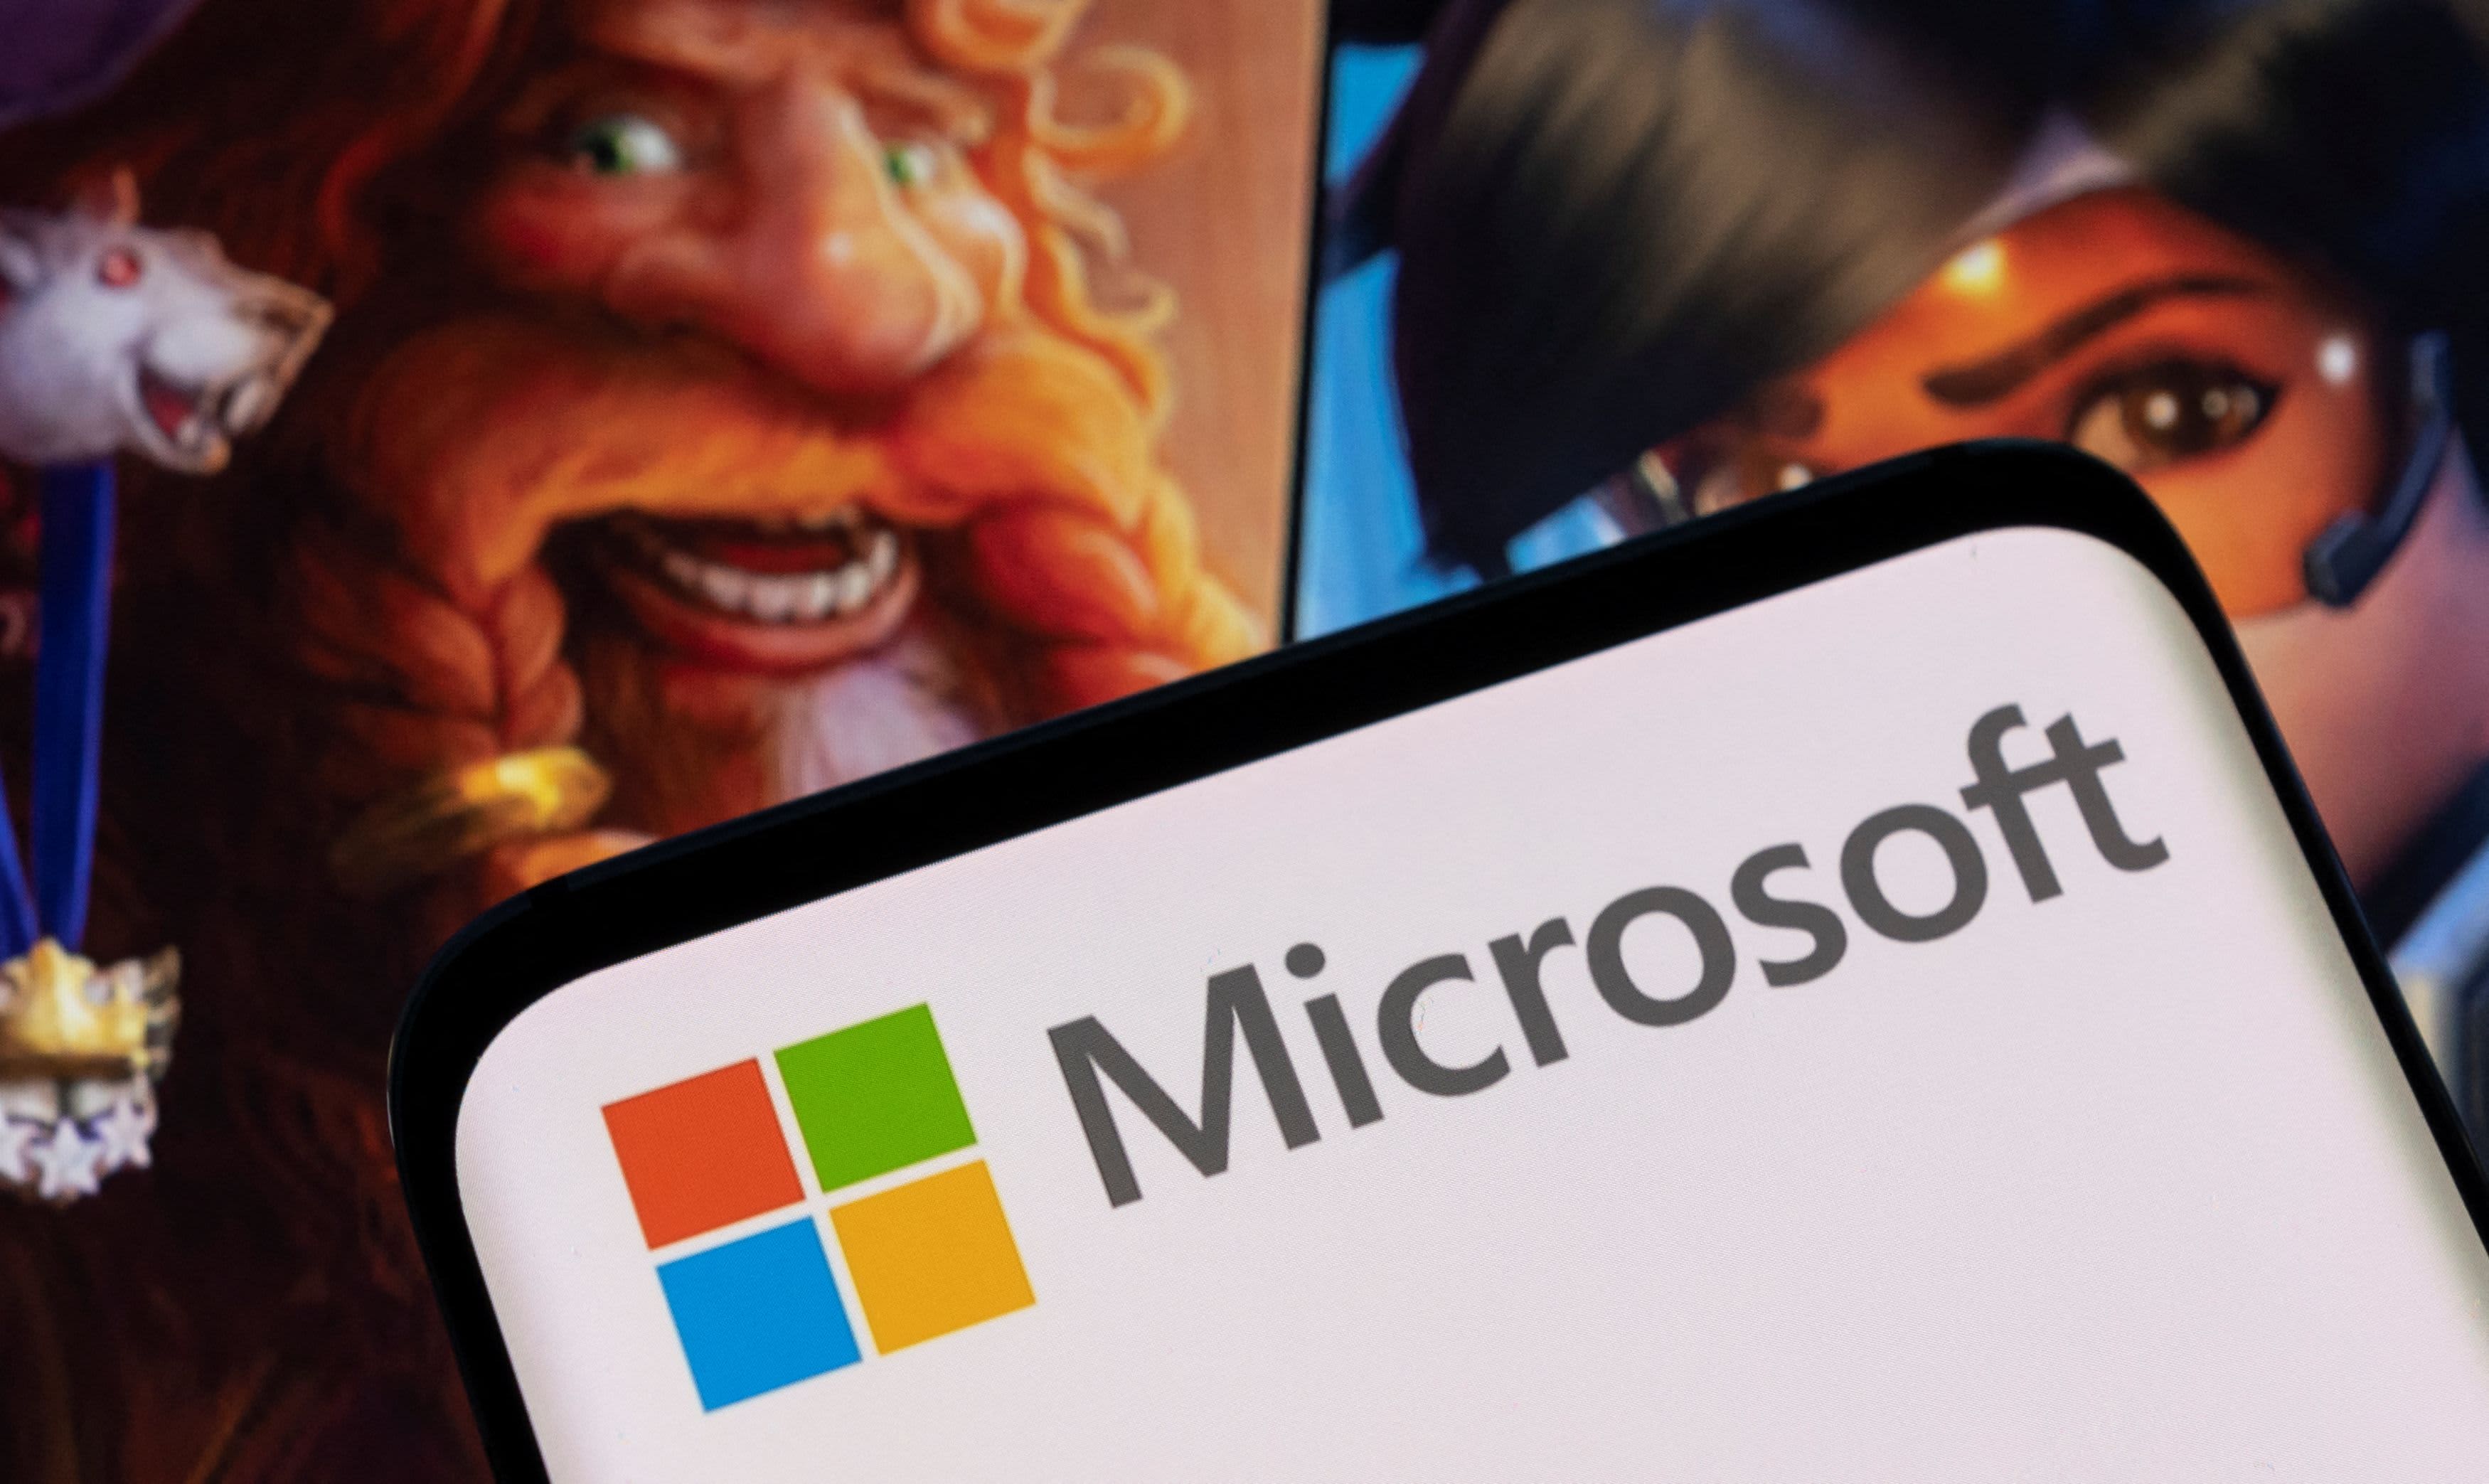 Microsoft Activision takeover faces competition probe in the UK